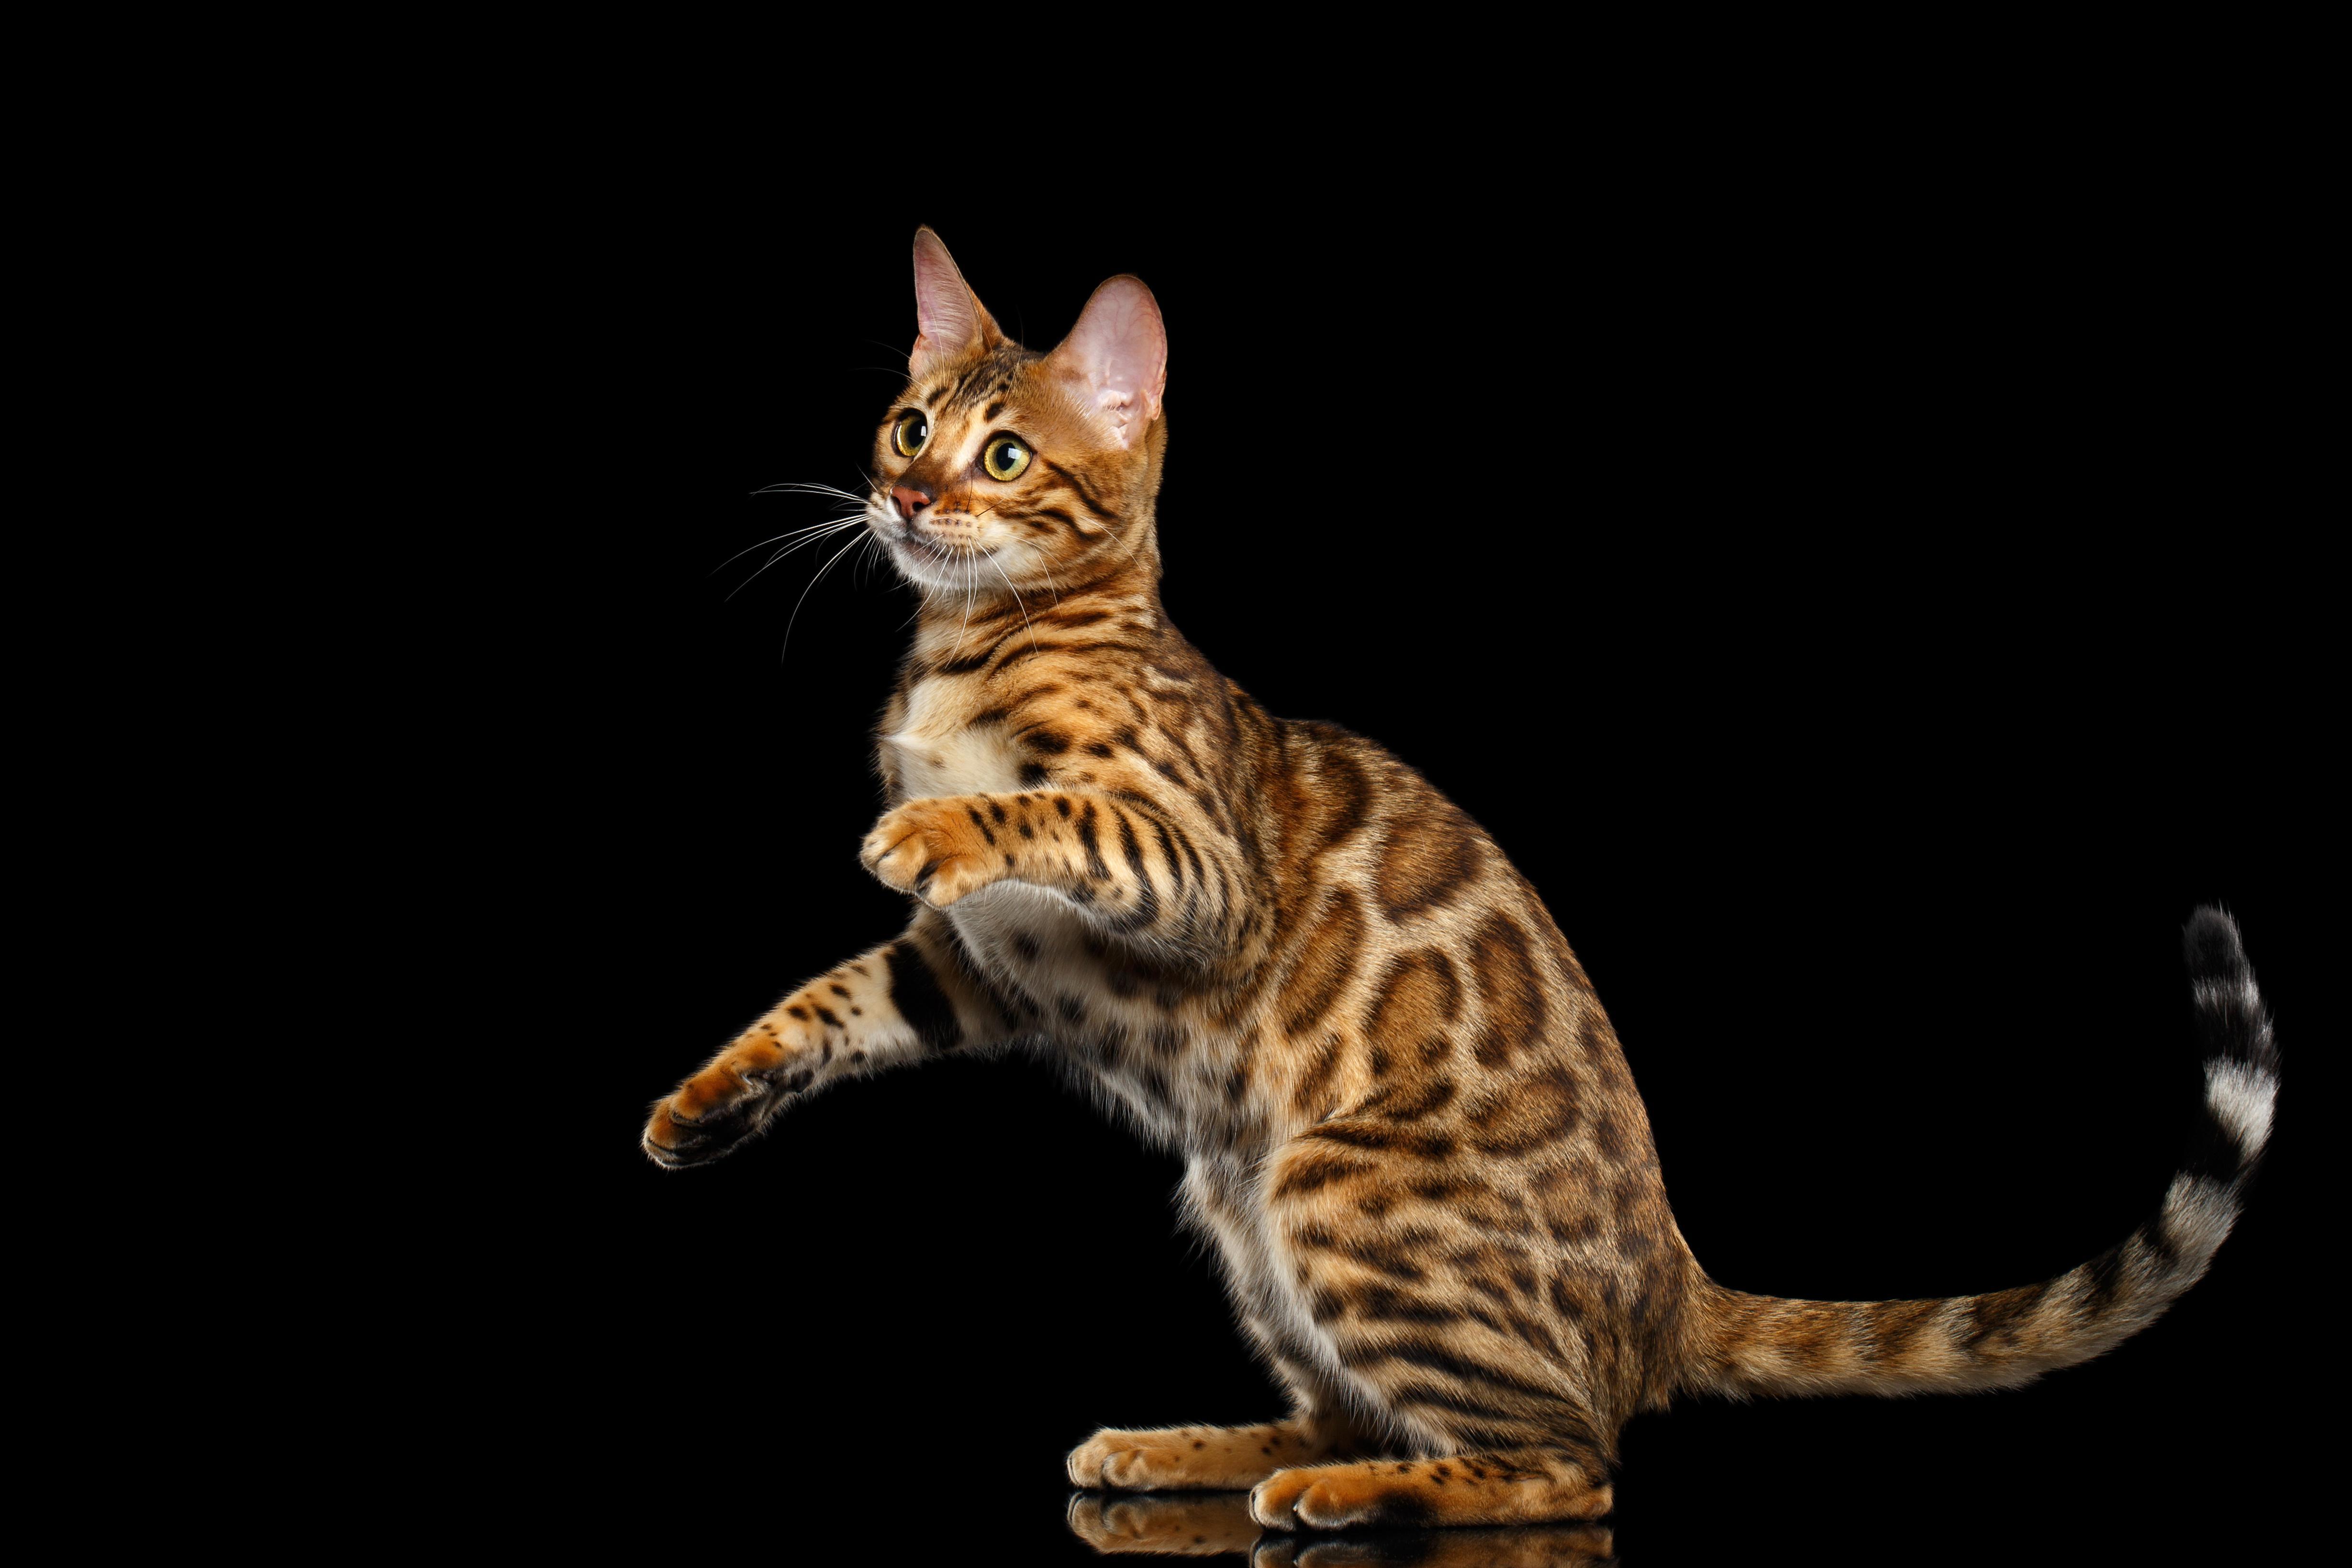 Beautiful Bengal cat on a black background wallpaper and image